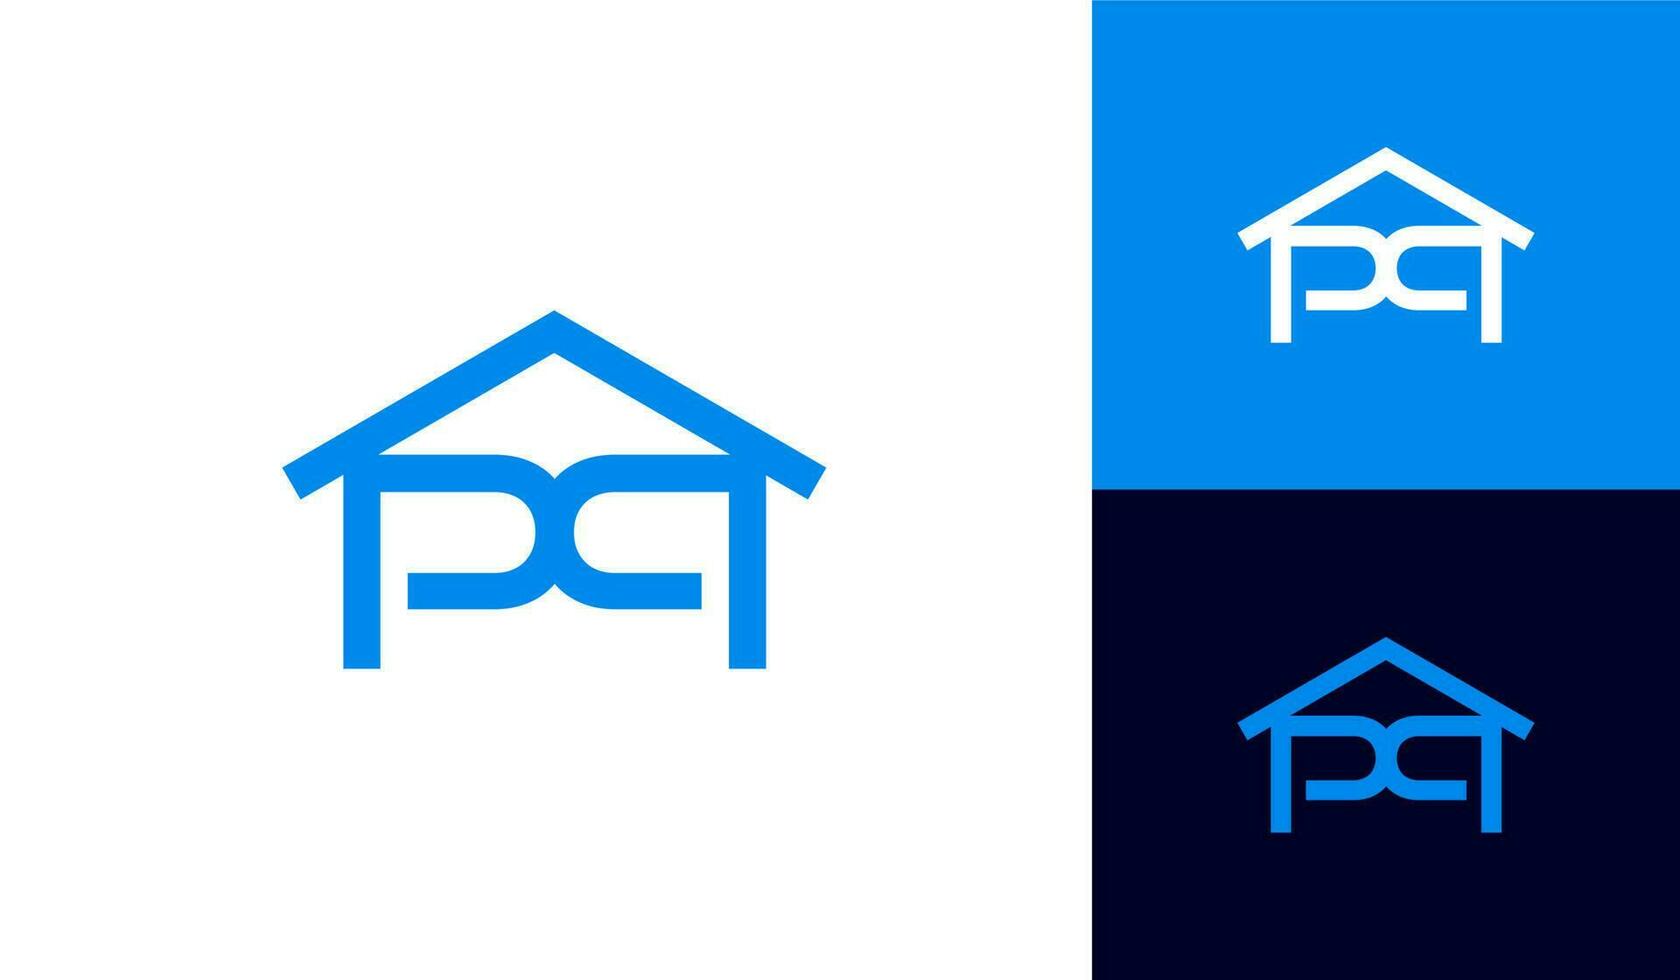 Abstract house logo with letter PP vector